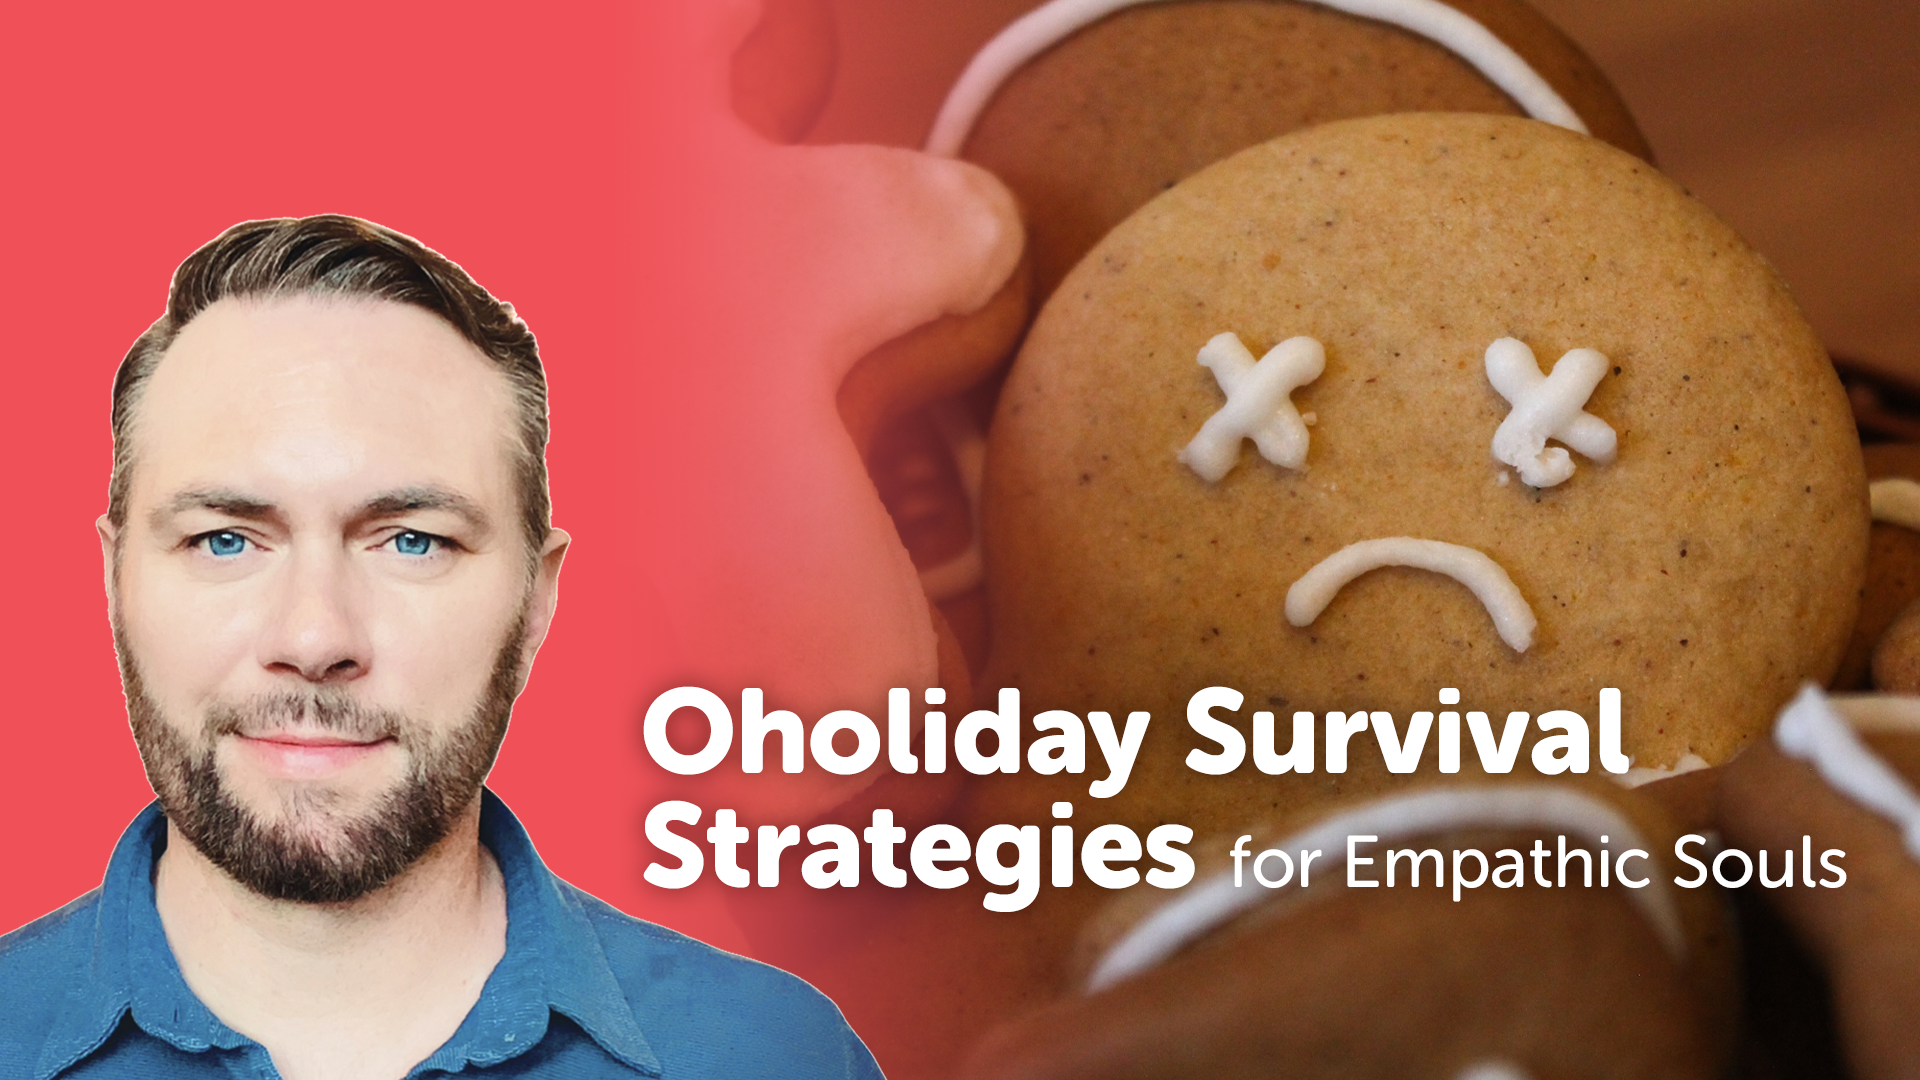 Video – Oholiday Survival Strategies for Empathic Souls